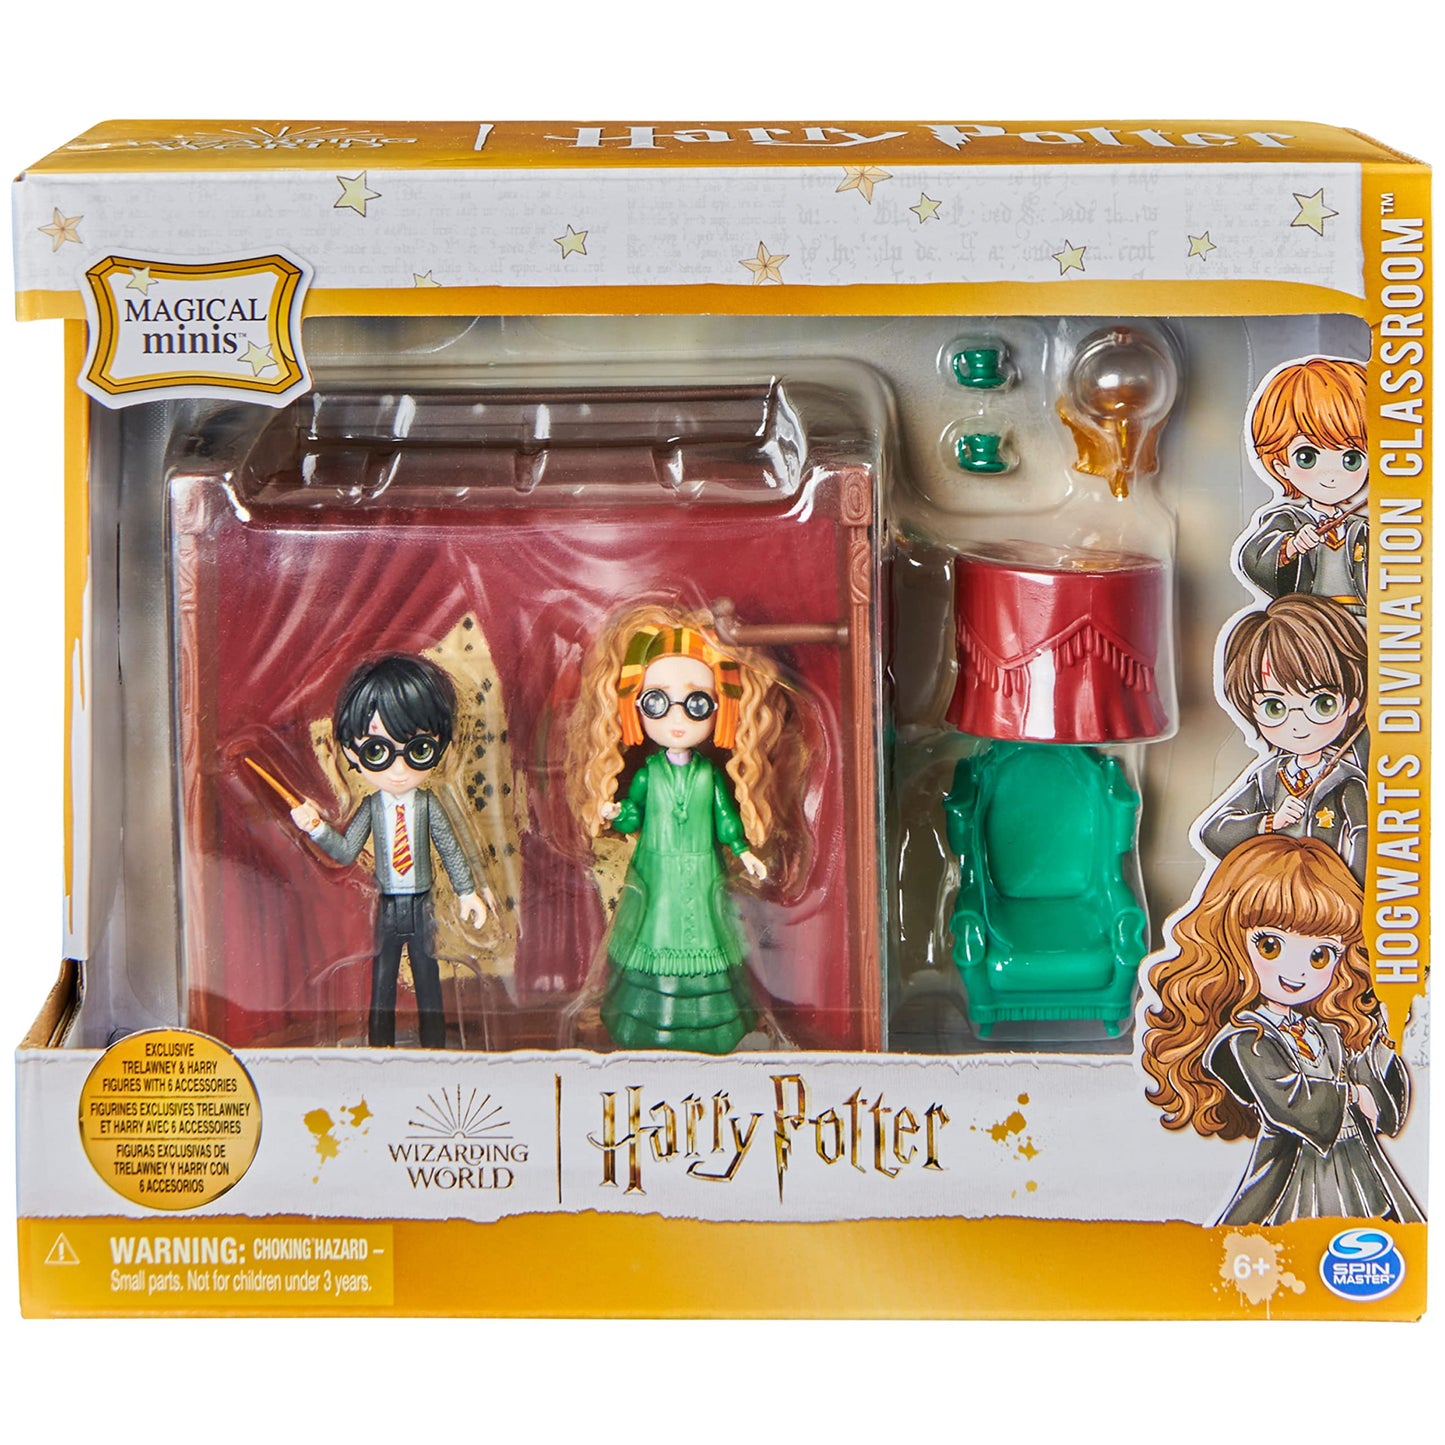 Wizarding World Harry Potter Magical Minis